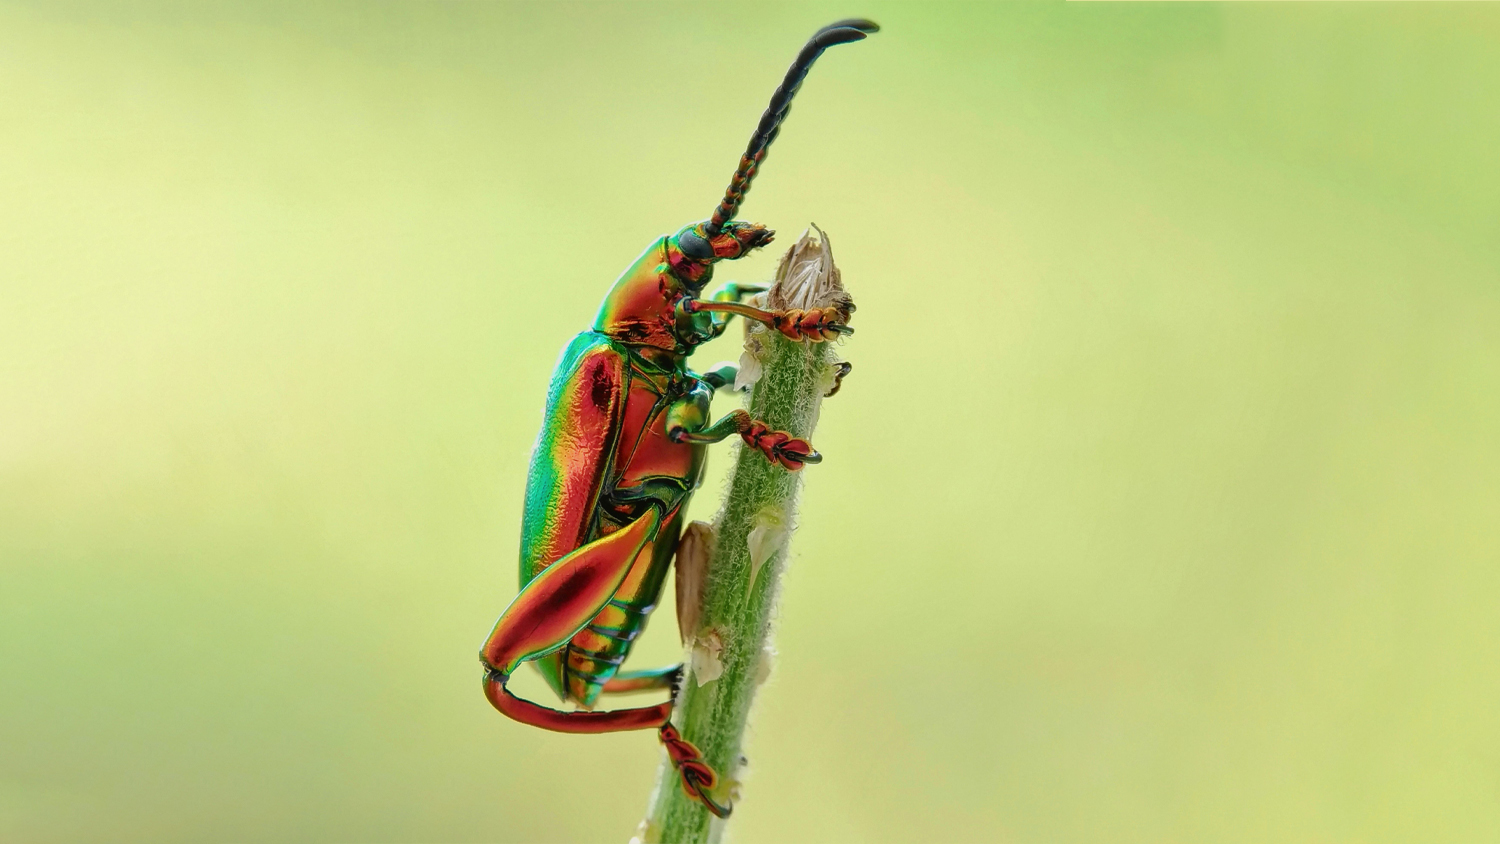 Image shows a jewel beetle on a green branch on a gradient green background.